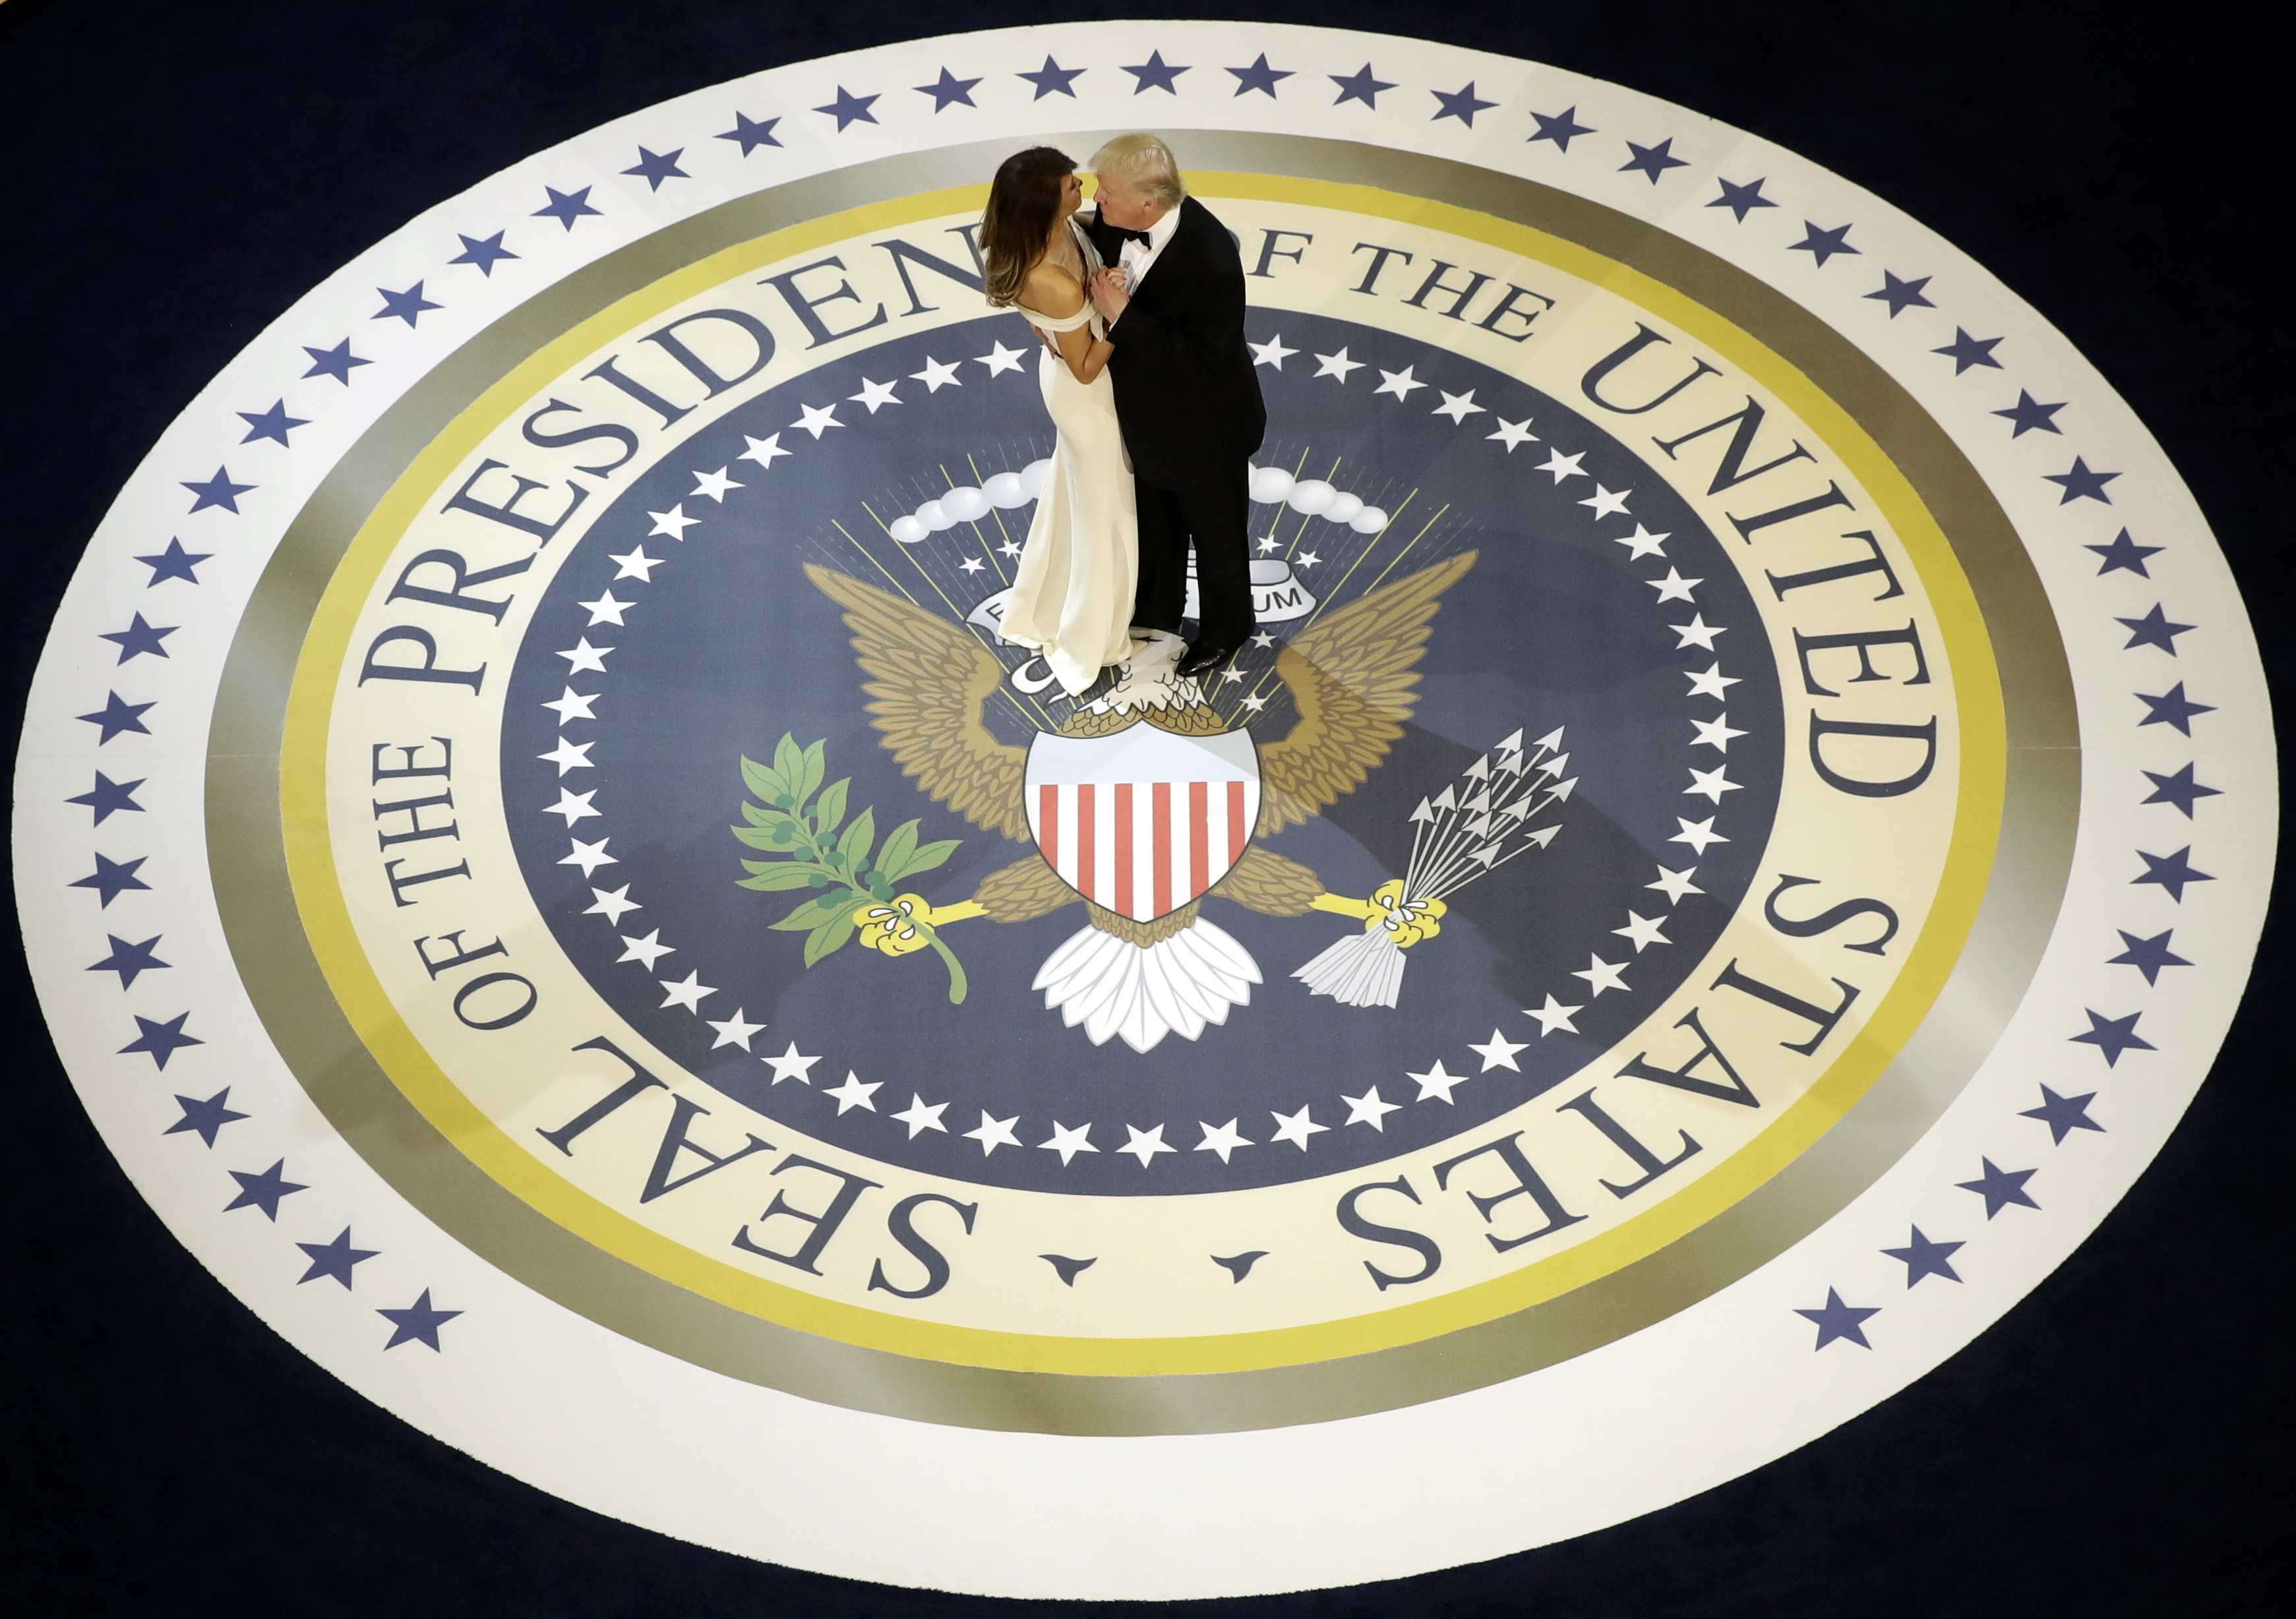 foto : evan vucci : president donald trump dances with first lady melania trump, at the salute to our armed services inaugural ball in washington, friday, jan. 20, 2017. (ap photo/evan vucci)